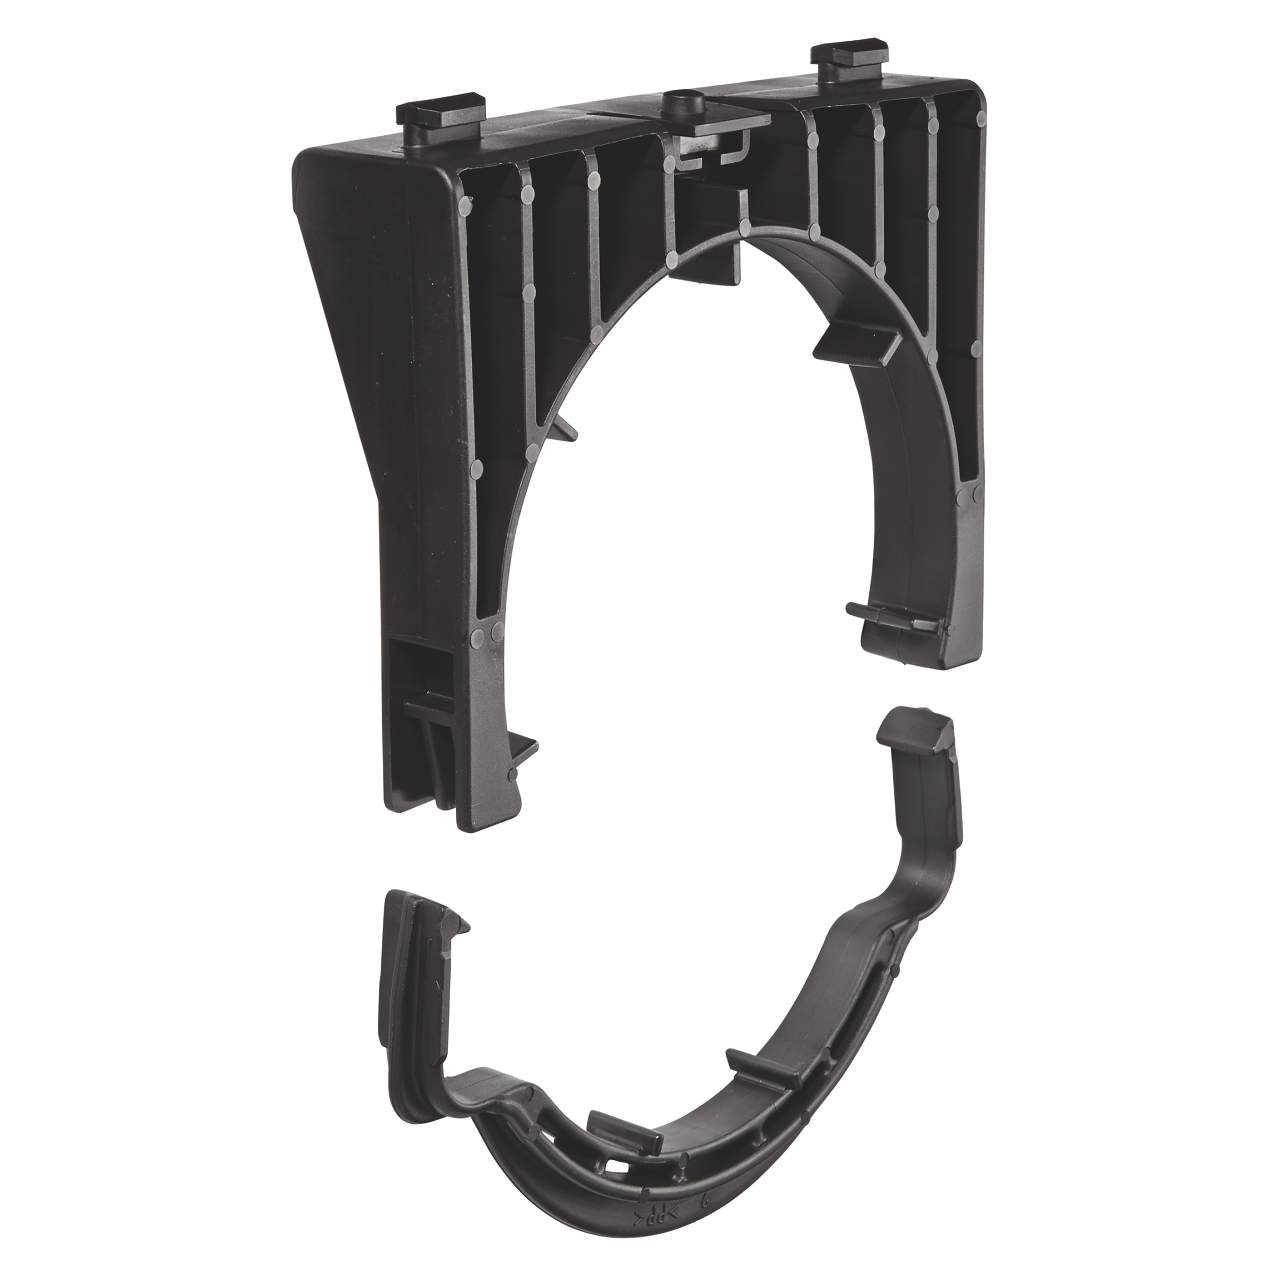 Complete mounting bracket for support frame